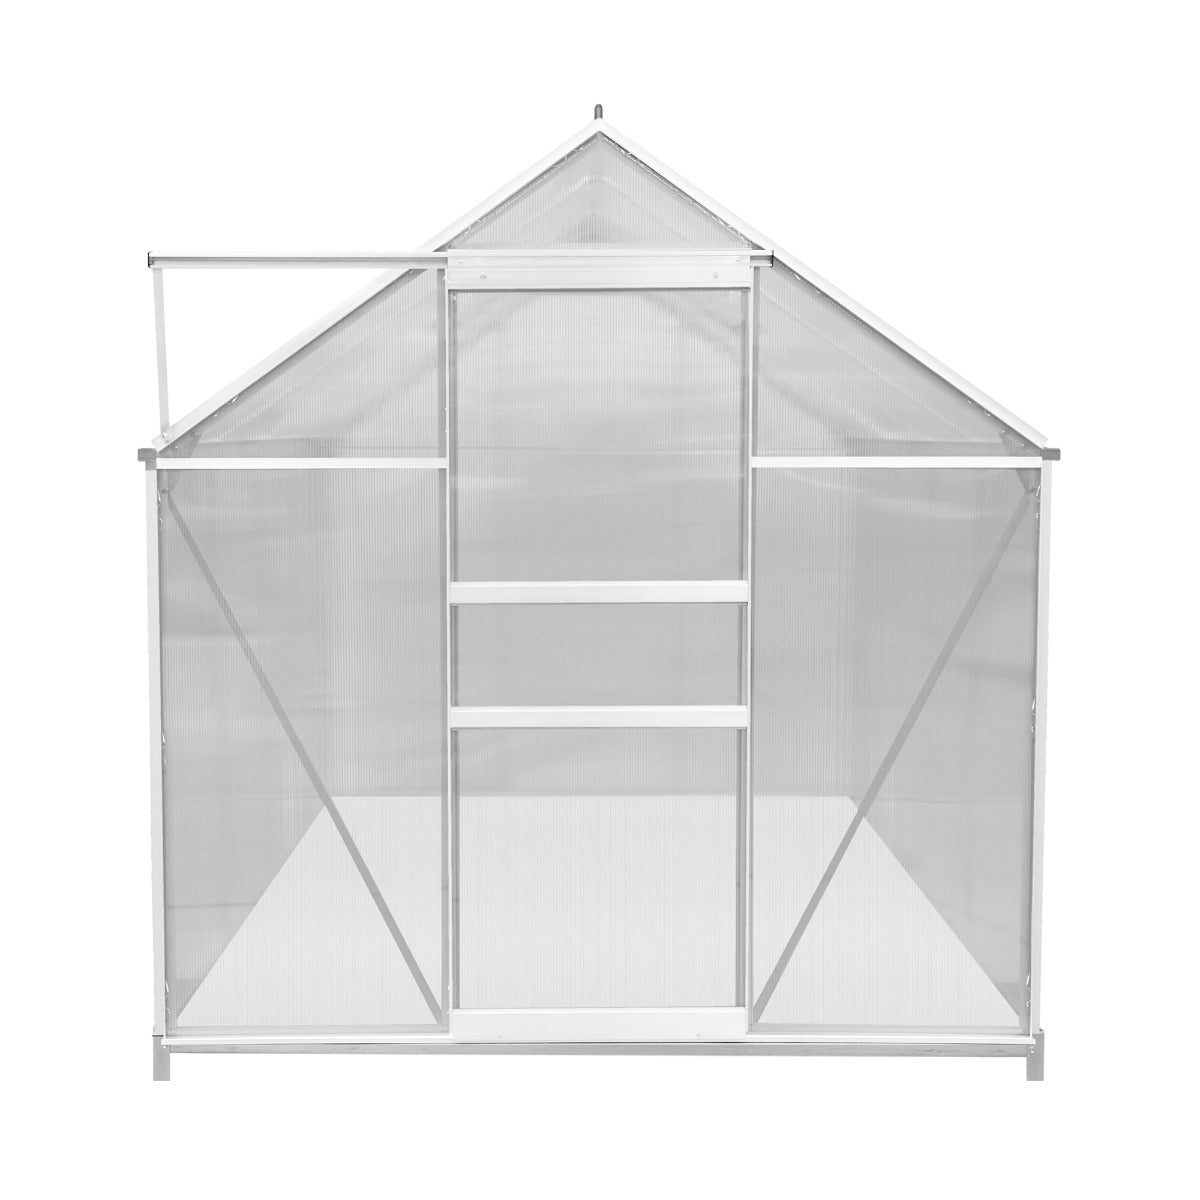 Polycarbonate Greenhouse 6ft x 8ft with Base – Silver